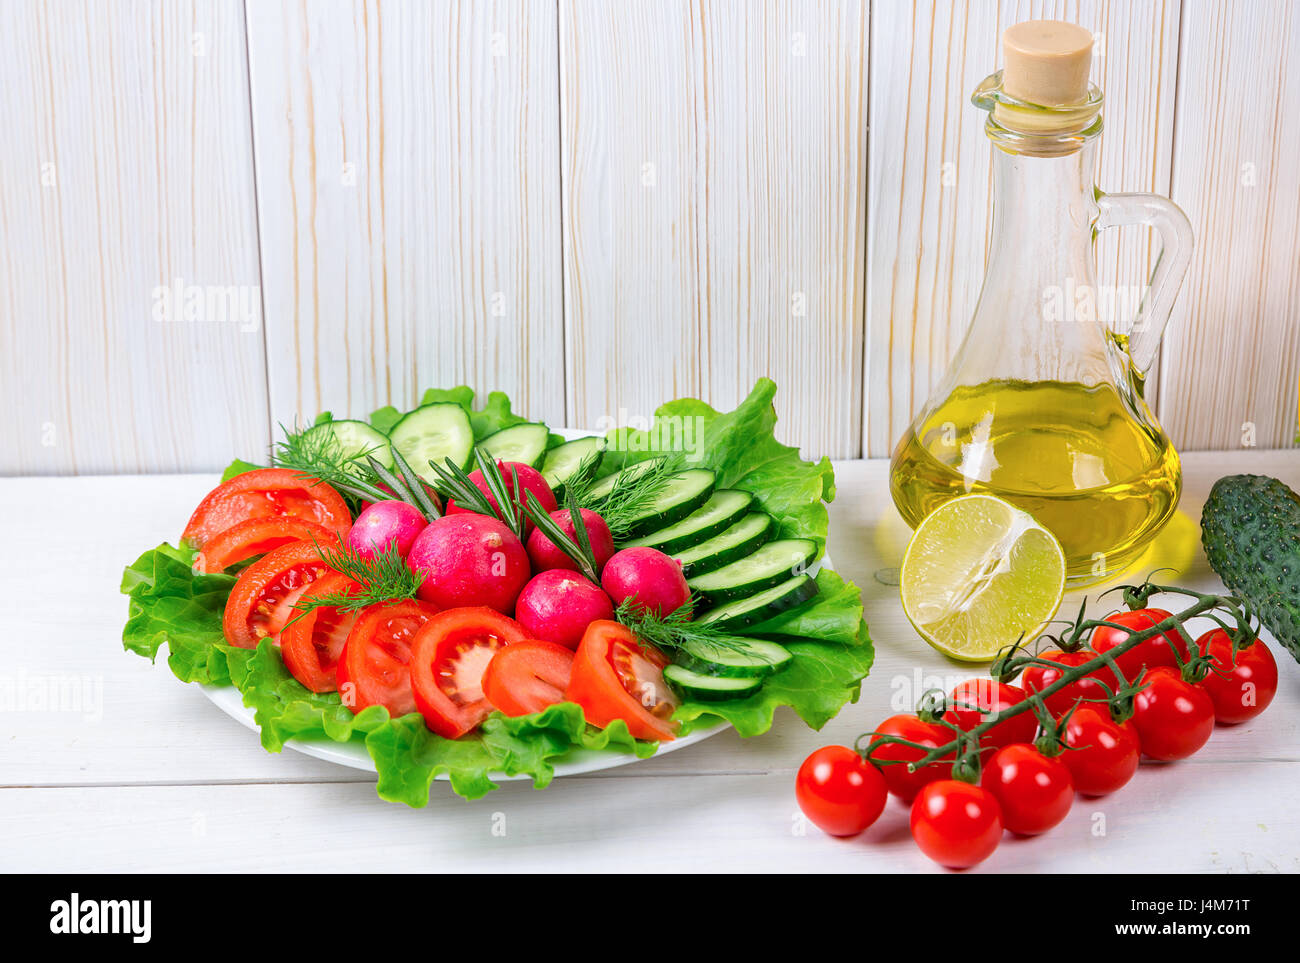 Cucumbers, radish, tomatoes cherry, olive oil, herb and spices on old white wooden background. Set for healthy foods. Ingredients for salad. Stock Photo